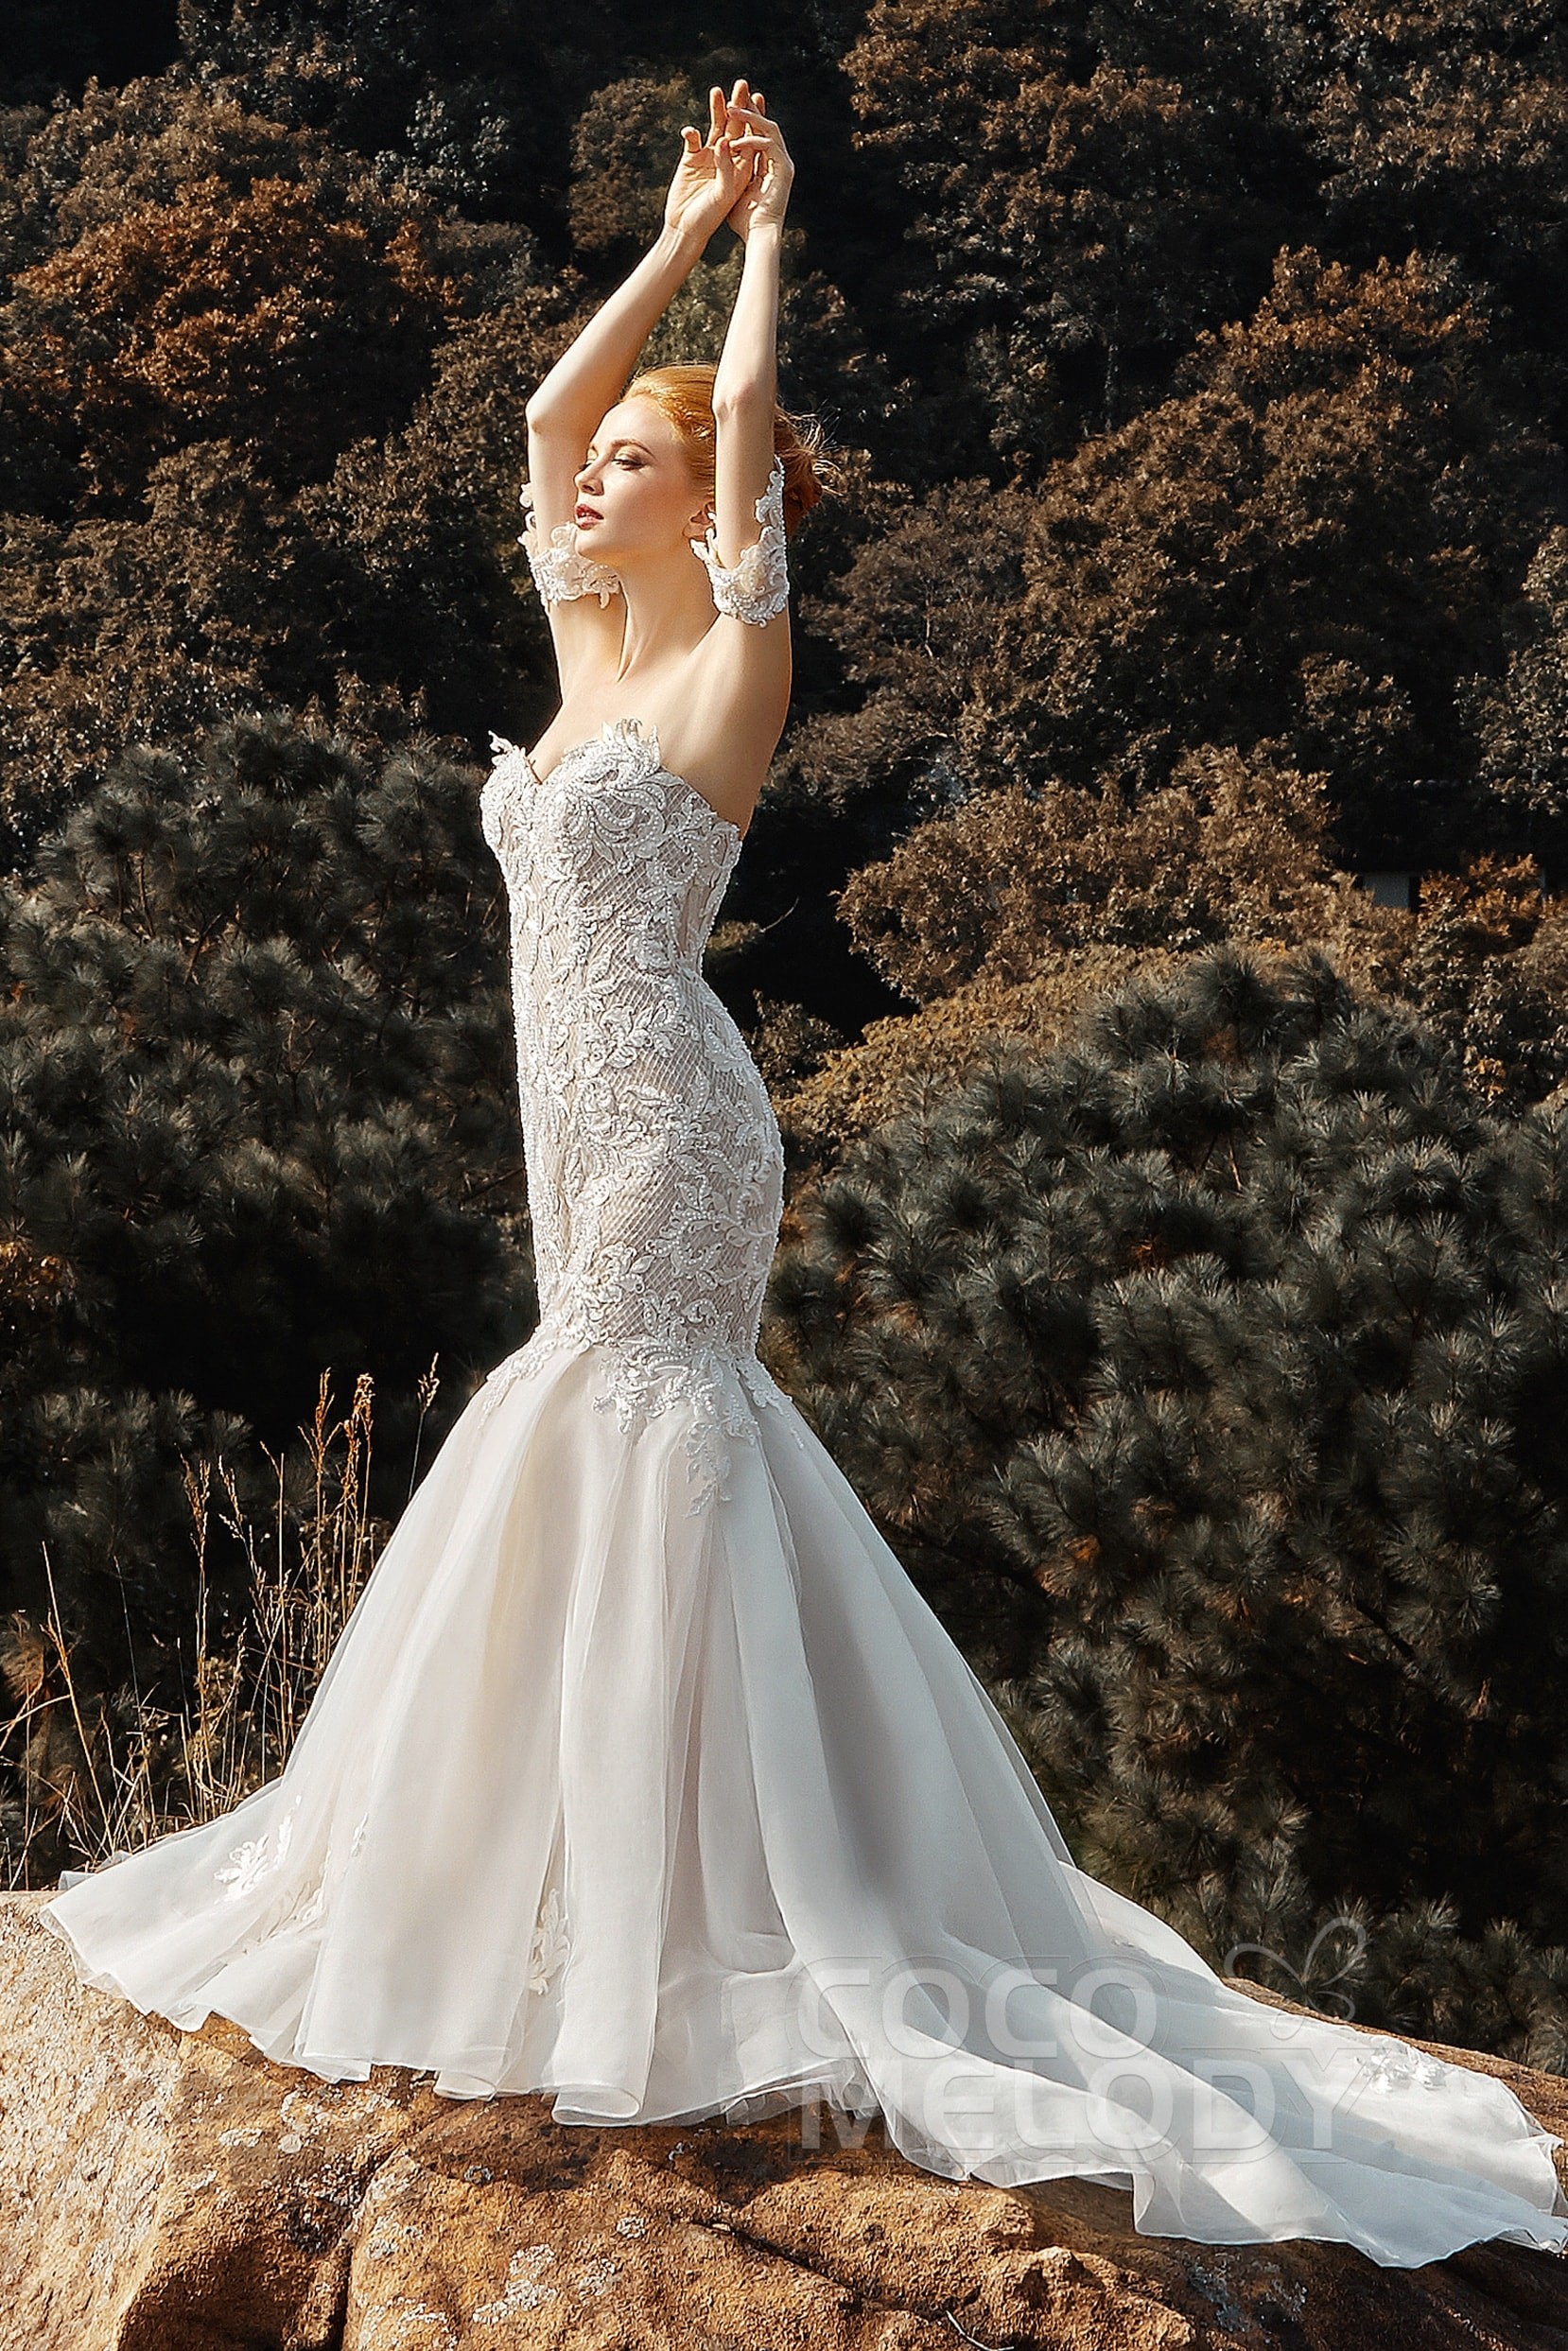 Wedding Dresses - From Traditional to Modern Wedding Gowns